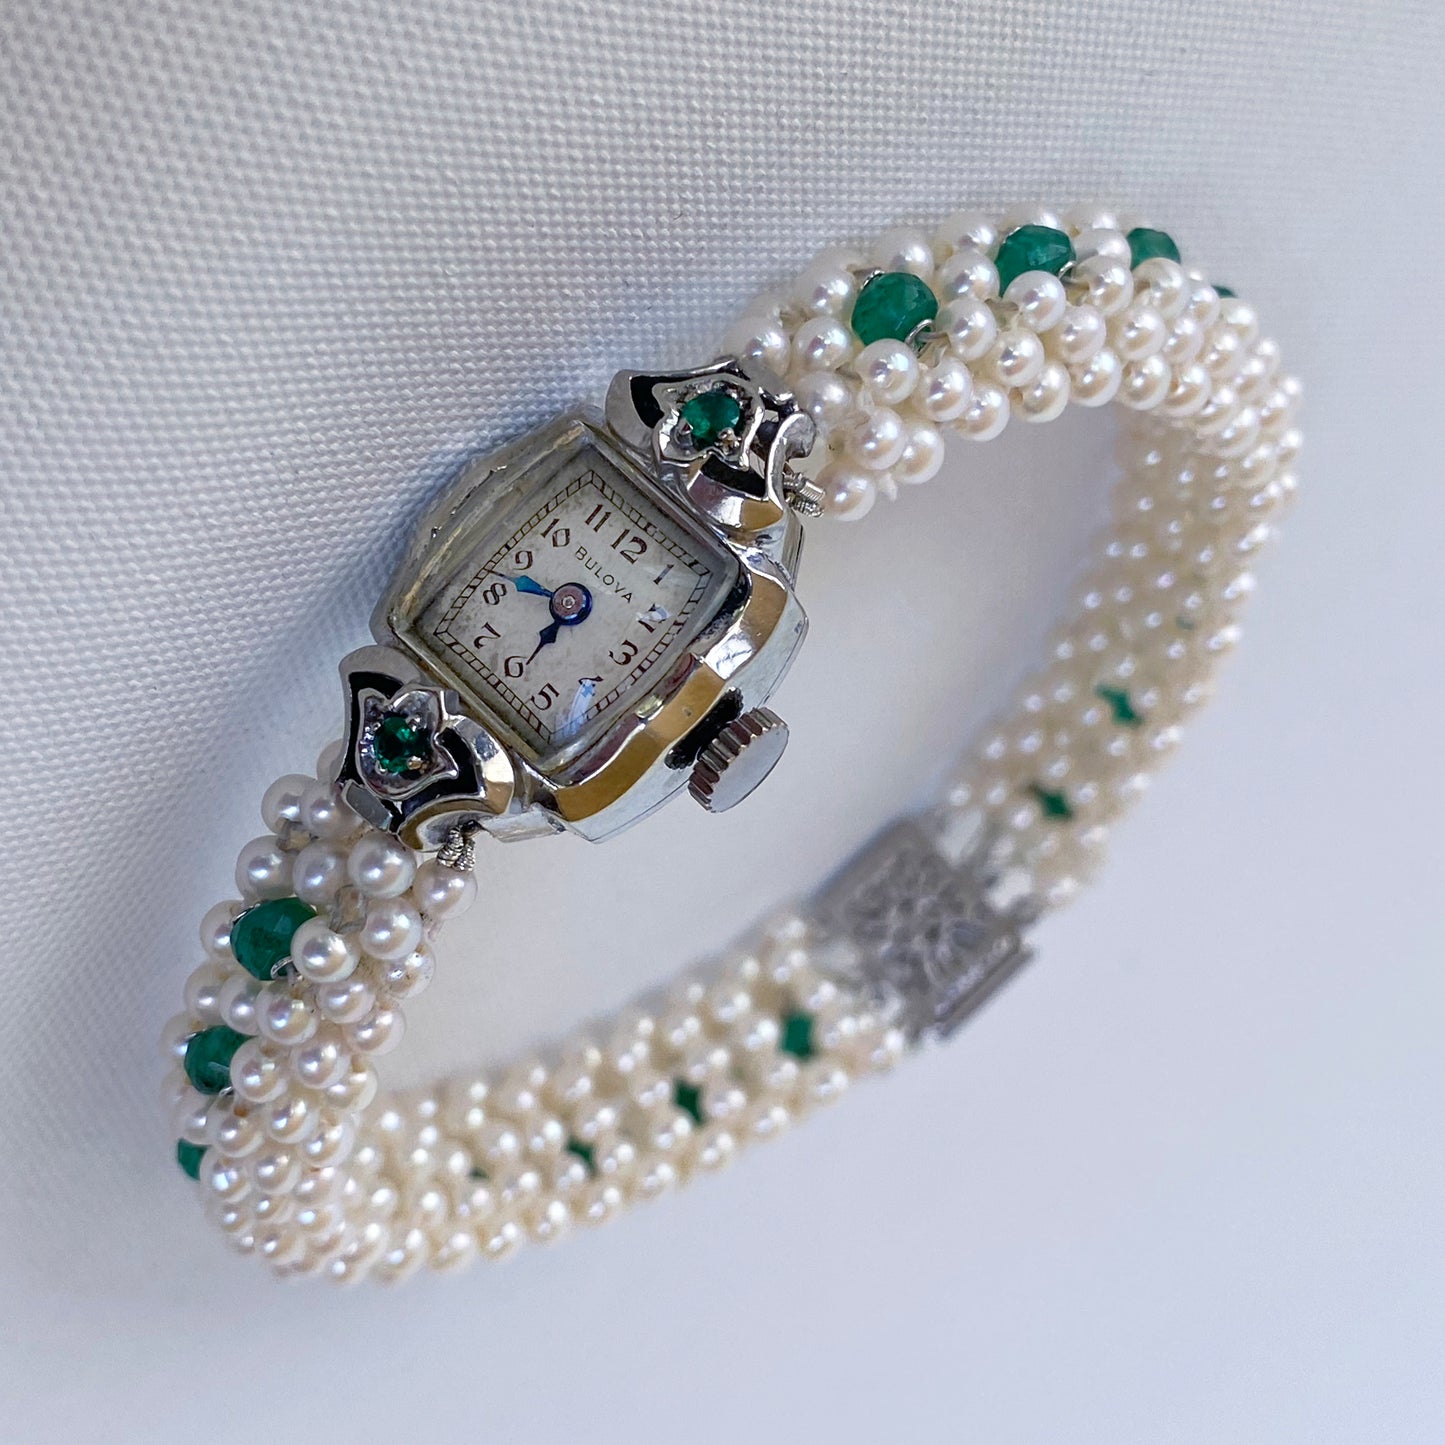 Emerald Encrusted Vintage Watch with Pearls and 14k White Gold